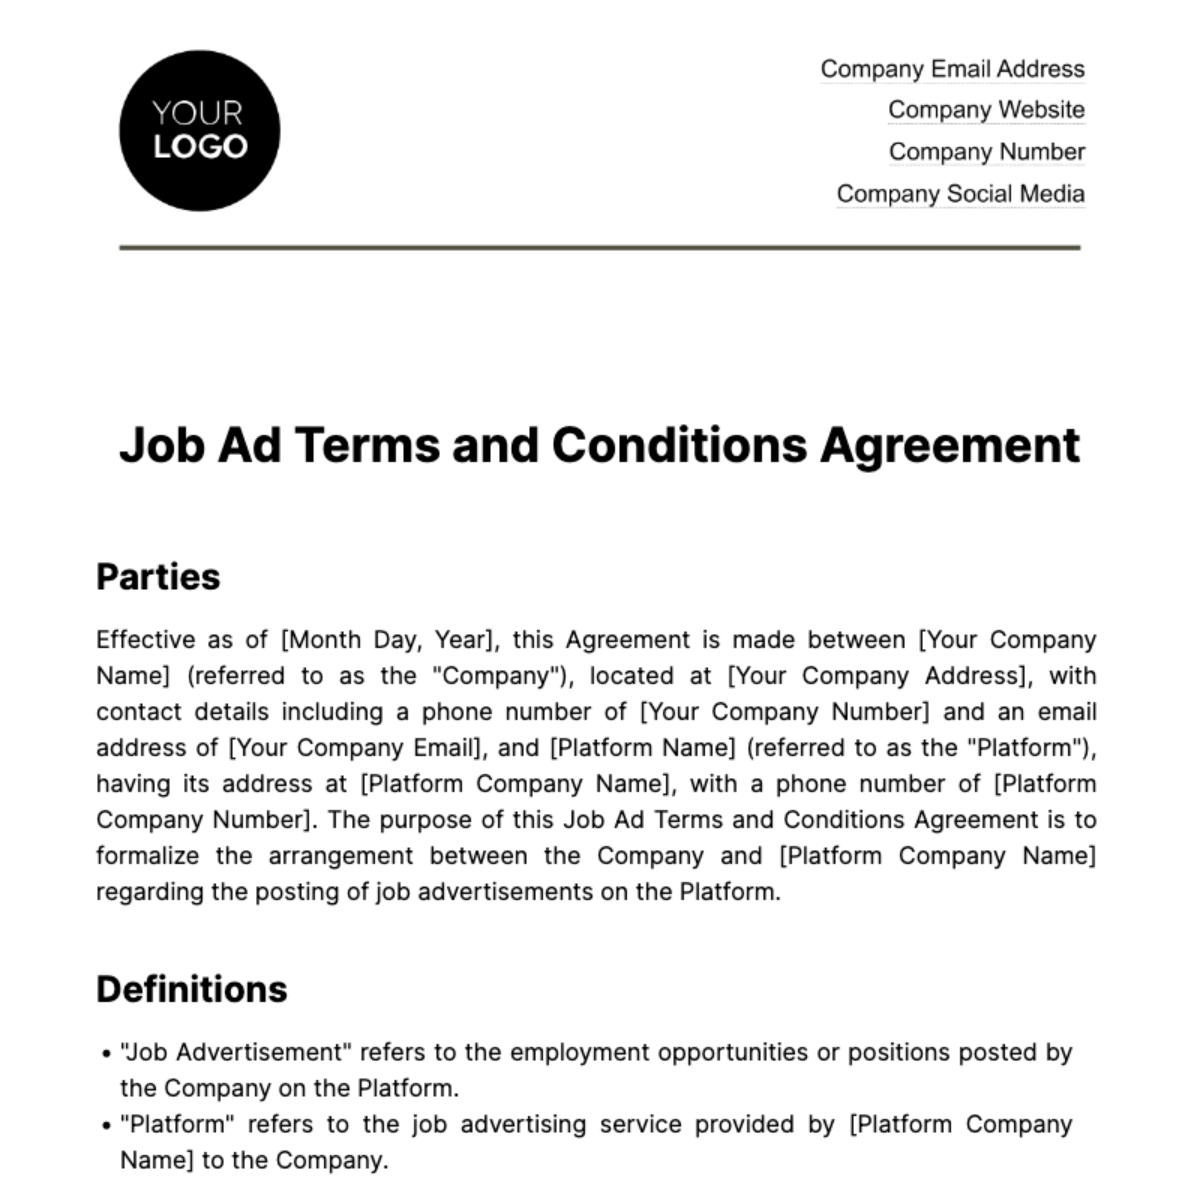 Job Ad Terms and Conditions Agreement HR Template